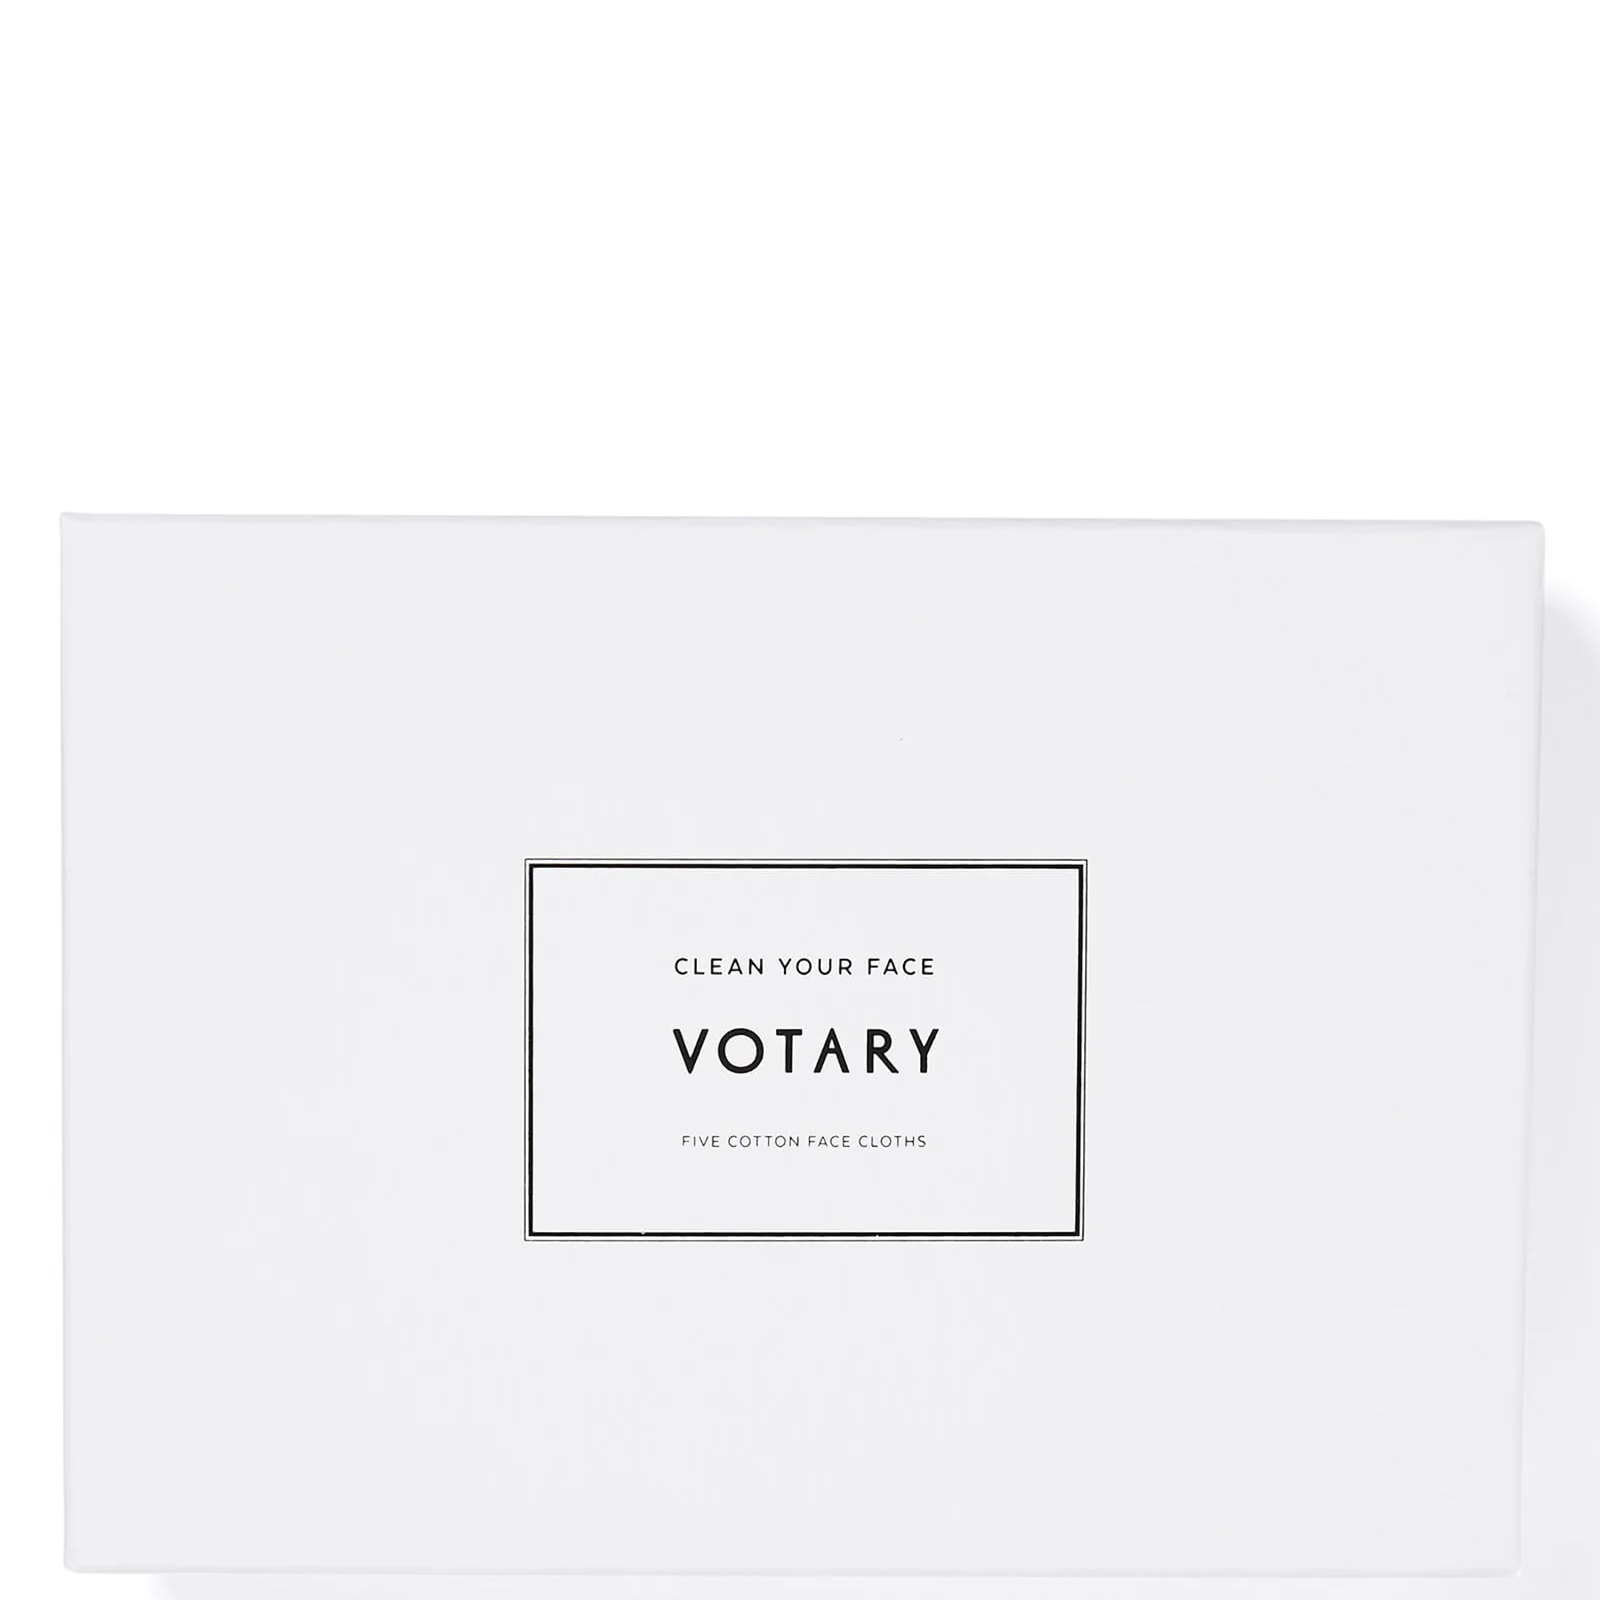 Votary Pack of Five Cotton Face Cloths - Set of 5 Image 1